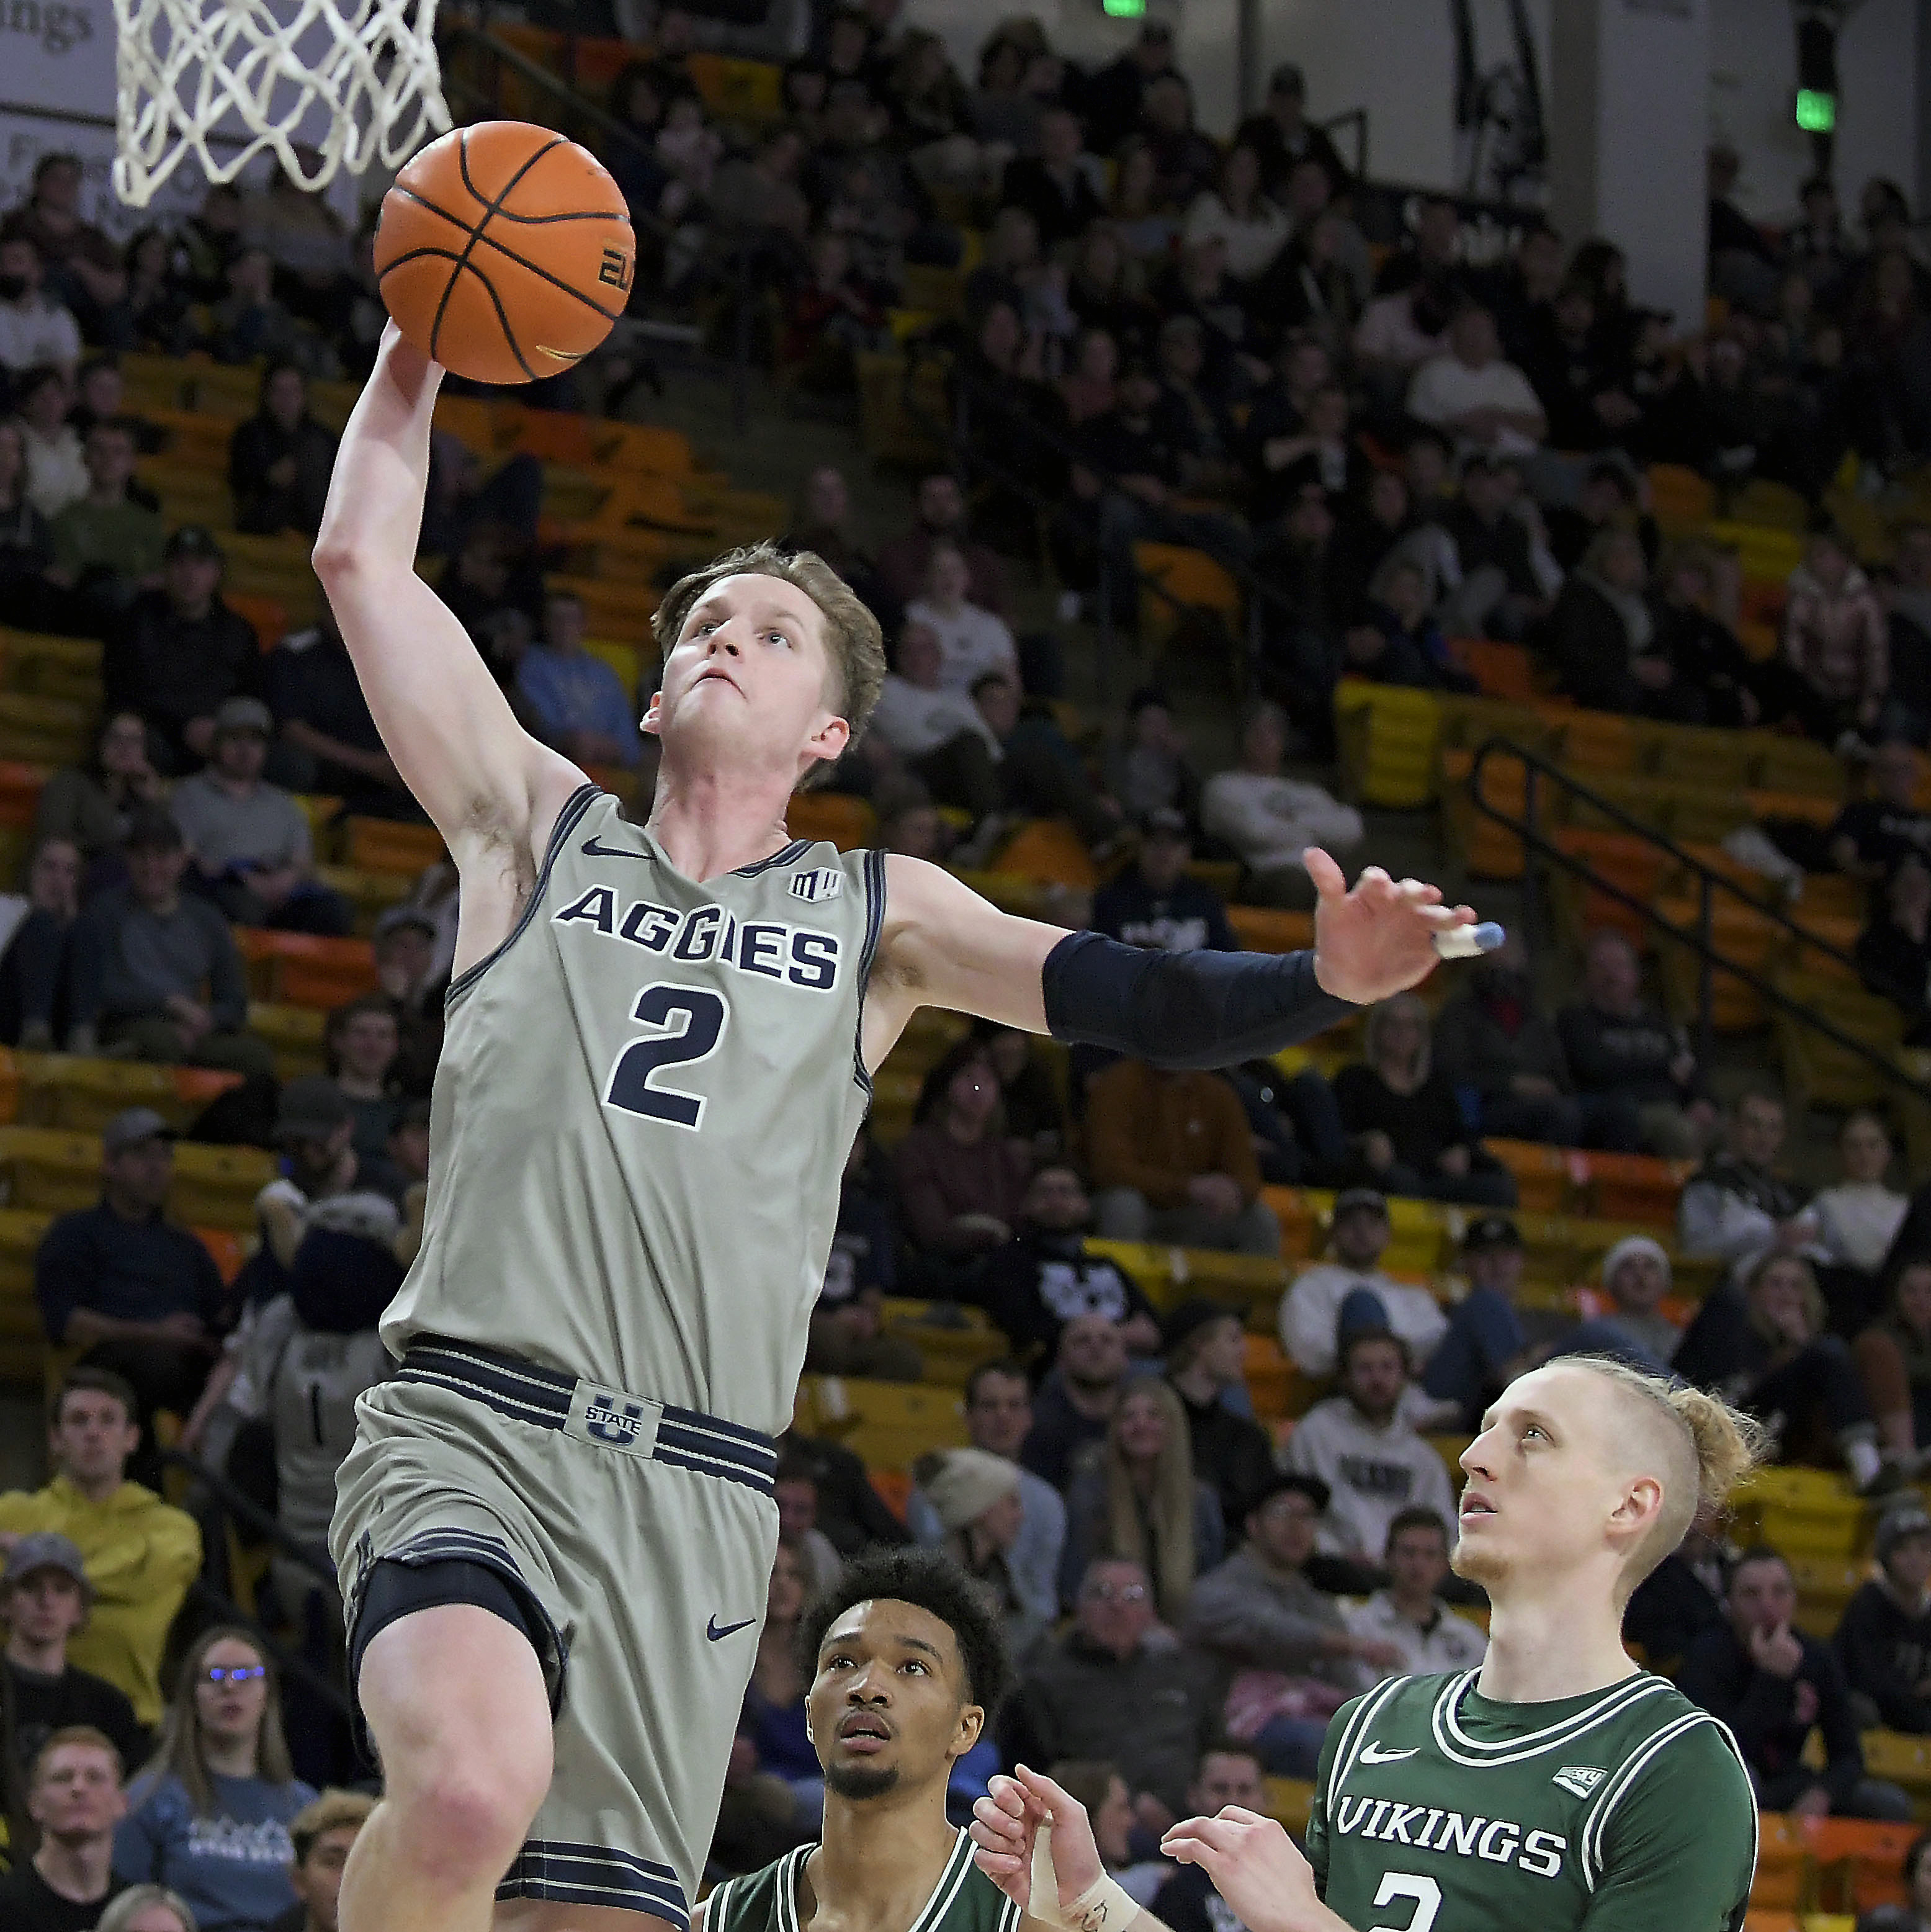 Utah State guard Sean Bairstow, wearing grey, goes up to dunk the ball as Portland State guard Michael Carter III and guard Ian Burke defend.